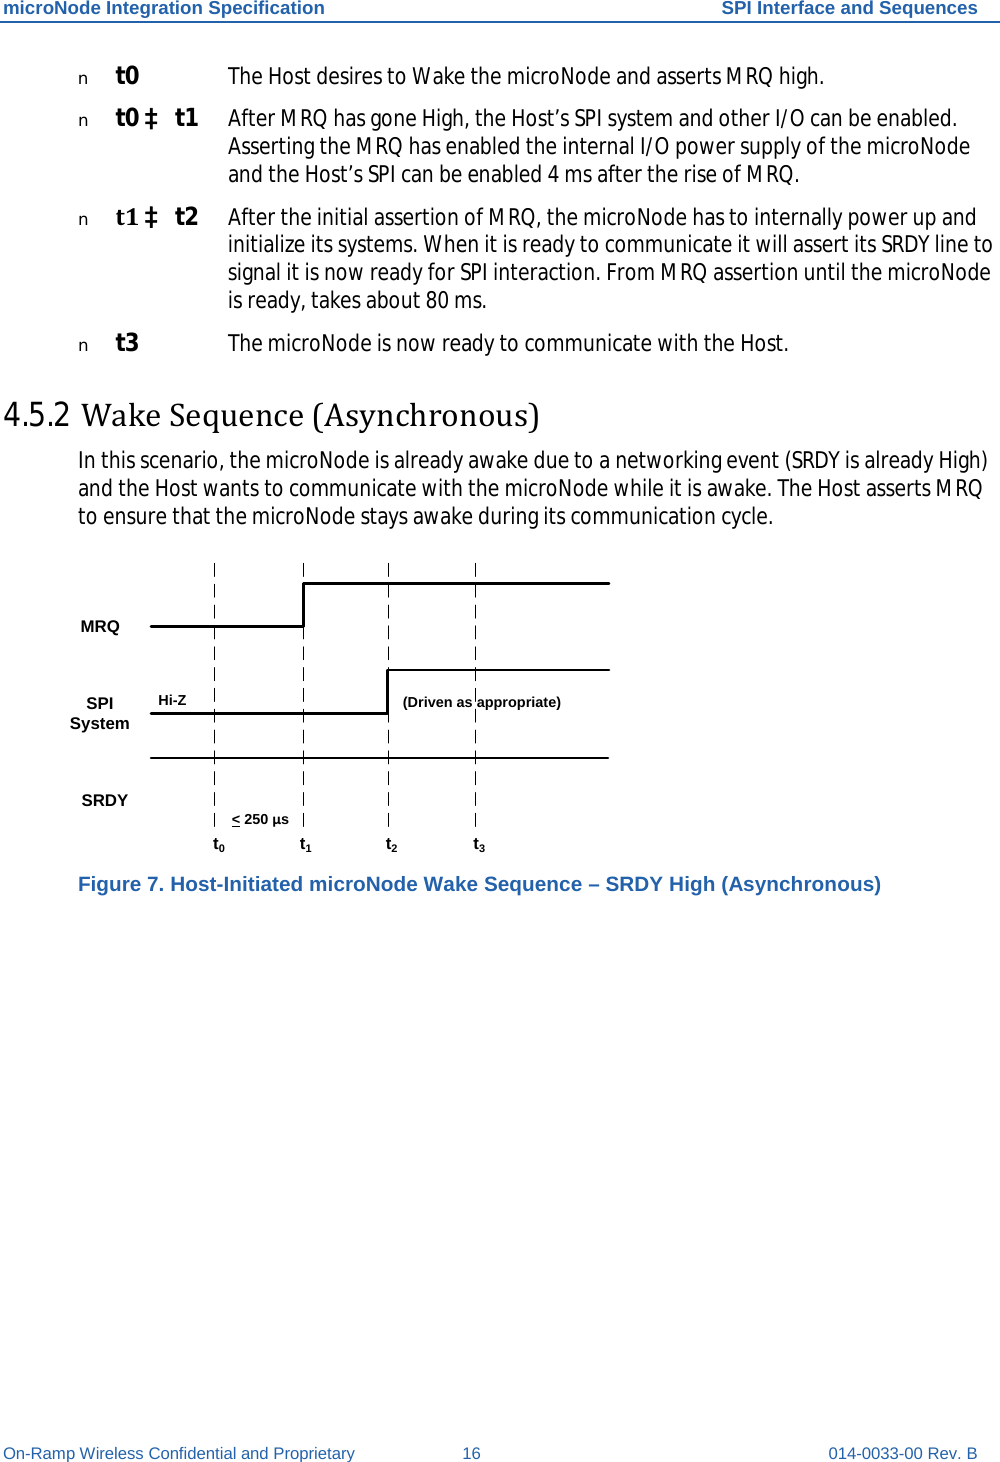 microNode Integration Specification SPI Interface and Sequences On-Ramp Wireless Confidential and Proprietary 16 014-0033-00 Rev. B n t0 The Host desires to Wake the microNode and asserts MRQ high. n t0 à t1 After MRQ has gone High, the Host’s SPI system and other I/O can be enabled. Asserting the MRQ has enabled the internal I/O power supply of the microNode and the Host’s SPI can be enabled 4 ms after the rise of MRQ. n t1 à t2 After the initial assertion of MRQ, the microNode has to internally power up and initialize its systems. When it is ready to communicate it will assert its SRDY line to signal it is now ready for SPI interaction. From MRQ assertion until the microNode is ready, takes about 80 ms. n t3 The microNode is now ready to communicate with the Host. 4.5.2 Wake Sequence (Asynchronous) In this scenario, the microNode is already awake due to a networking event (SRDY is already High) and the Host wants to communicate with the microNode while it is awake. The Host asserts MRQ to ensure that the microNode stays awake during its communication cycle.  t0t1t2t3SRDYSPI SystemMRQHi-Z (Driven as appropriate)&lt; 250 μs Figure 7. Host-Initiated microNode Wake Sequence – SRDY High (Asynchronous) 